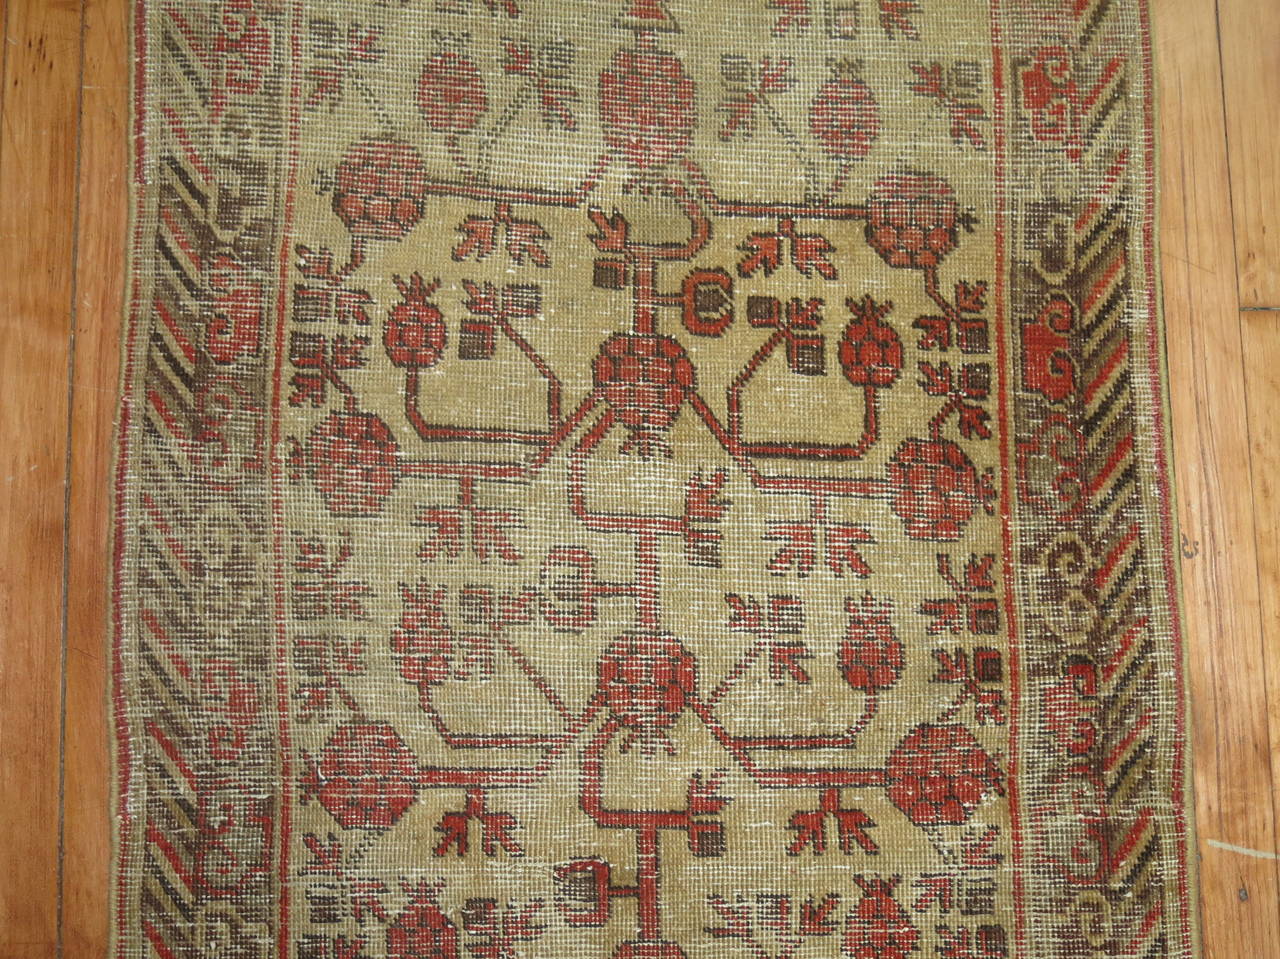 Hand-Knotted 19th Century Antique Khotan Throw Rug